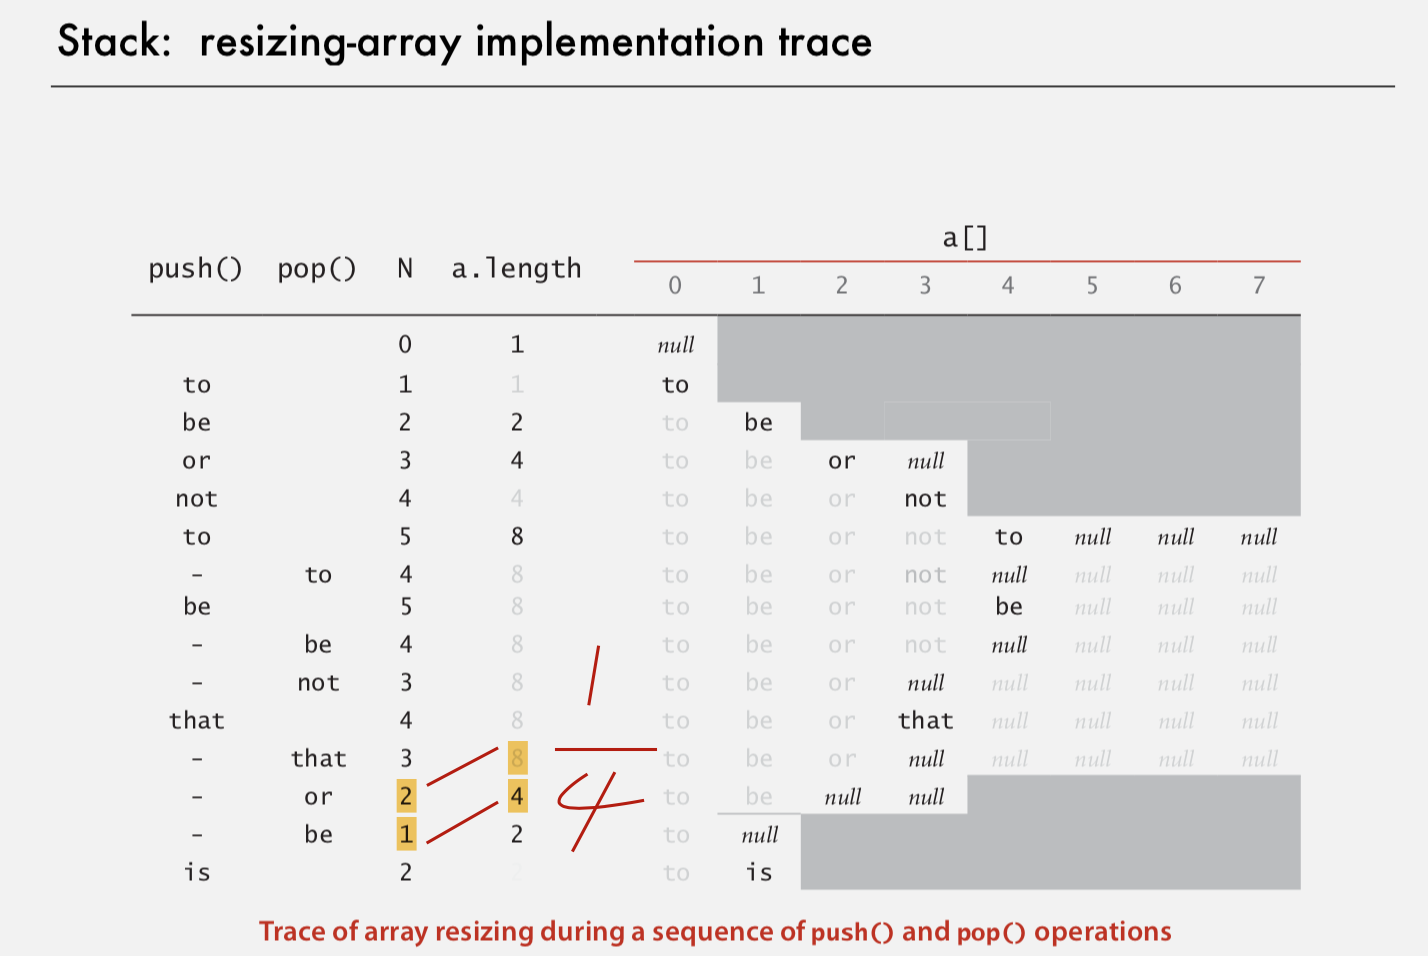 example of trace resizing array